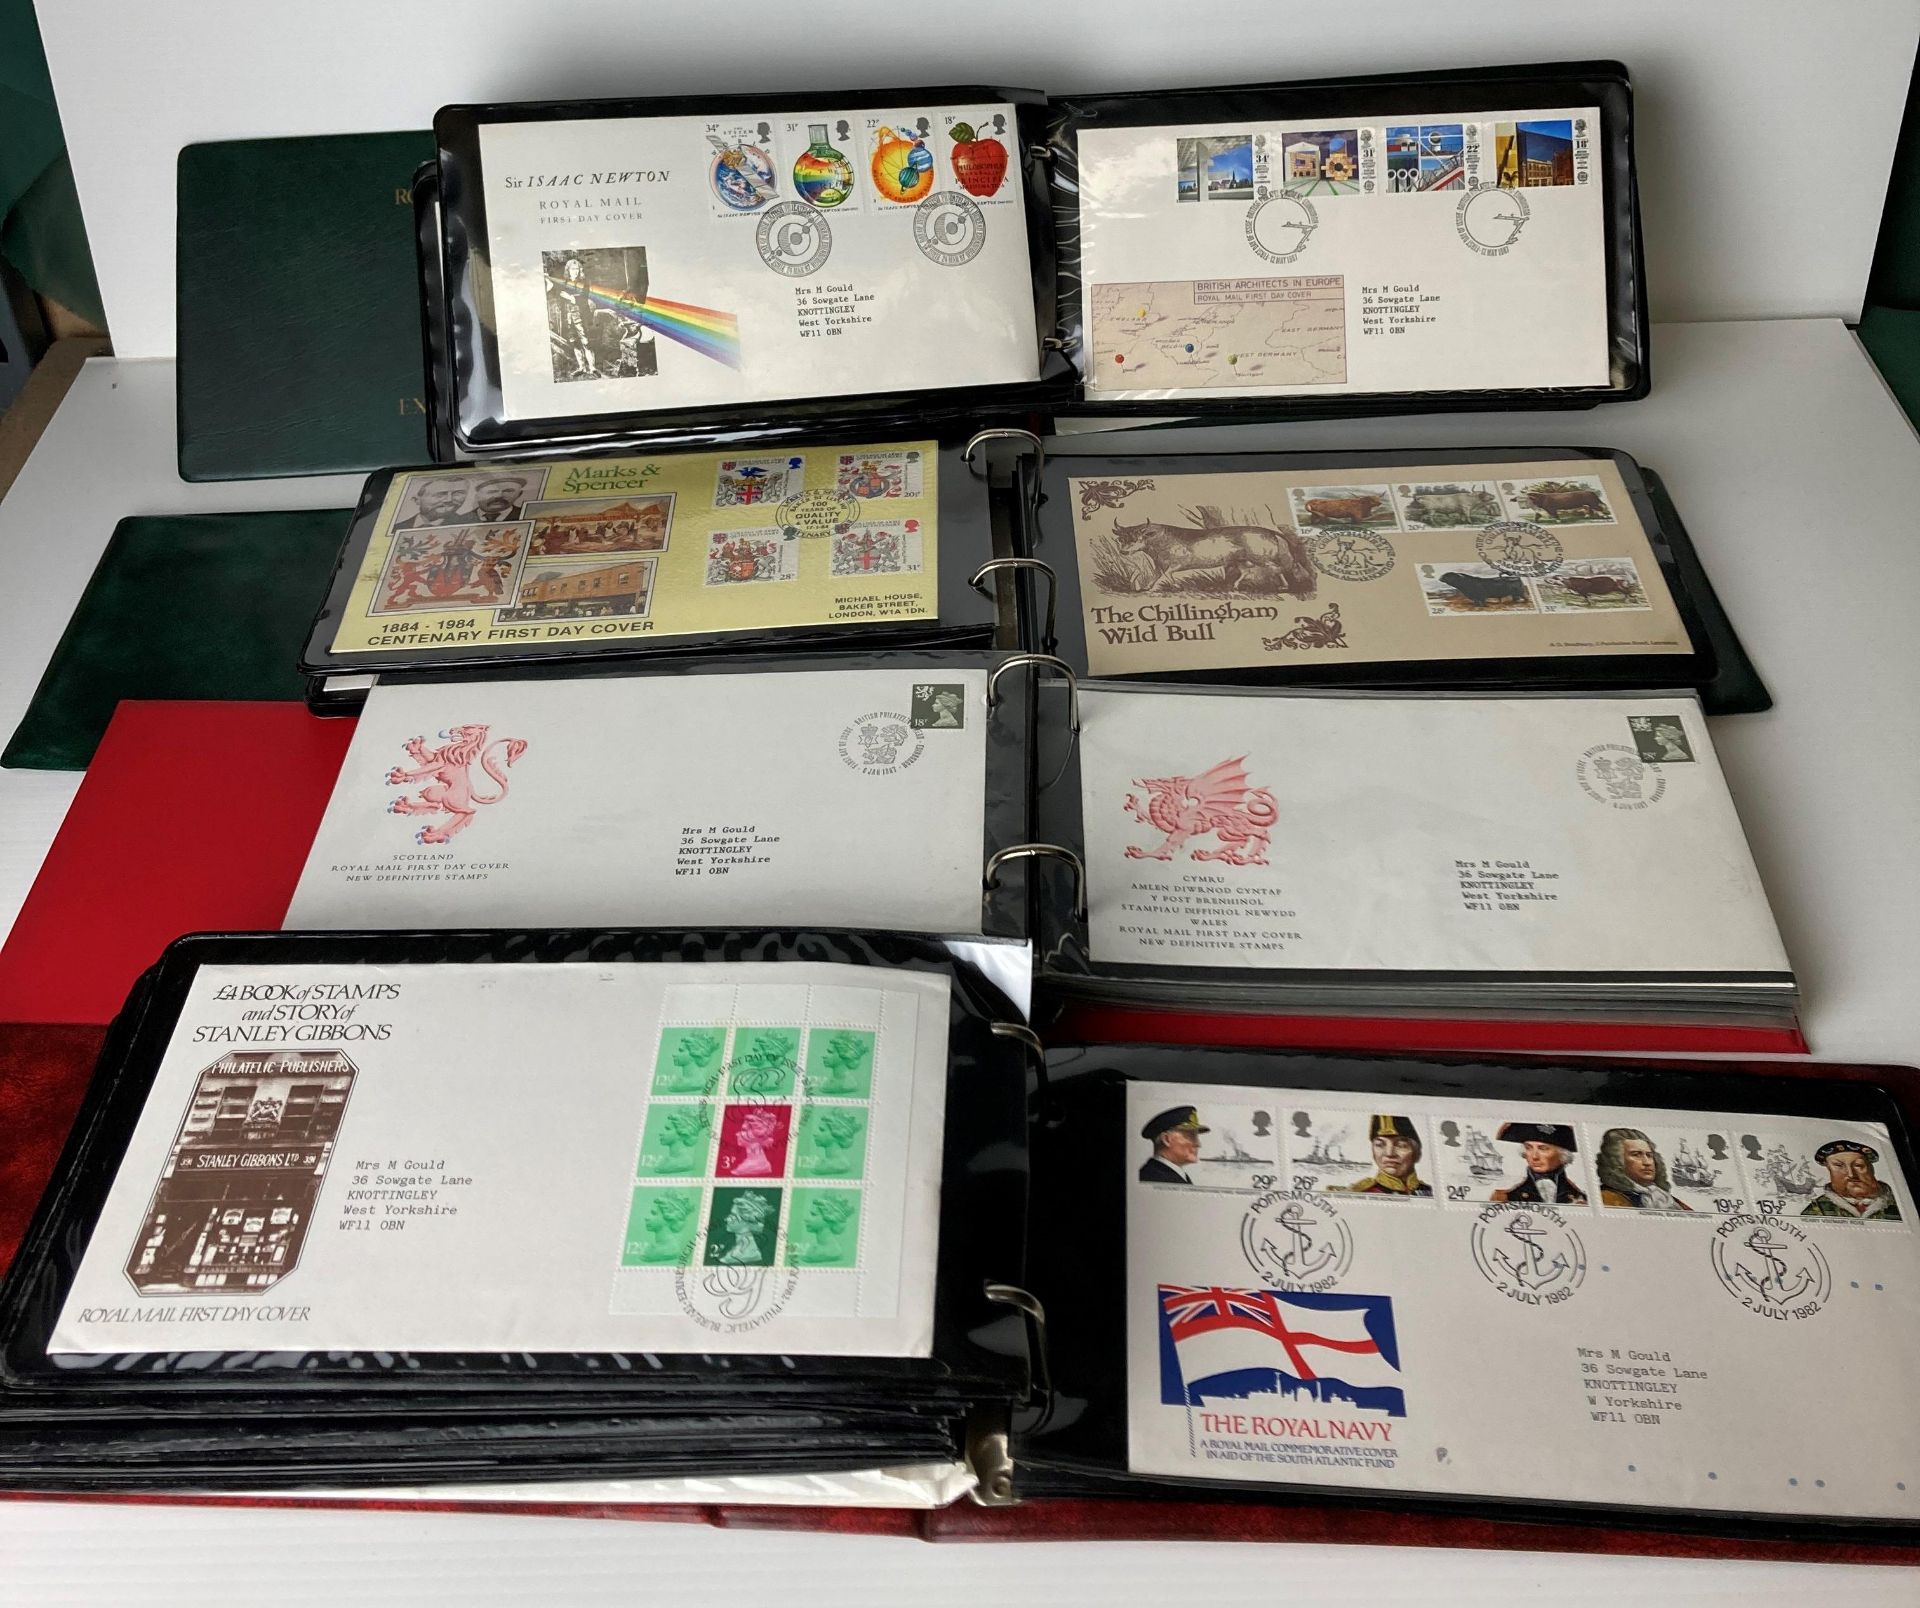 Four First Day Cover stamp albums and approximately 170 First Day Covers including Regional, - Image 4 of 4